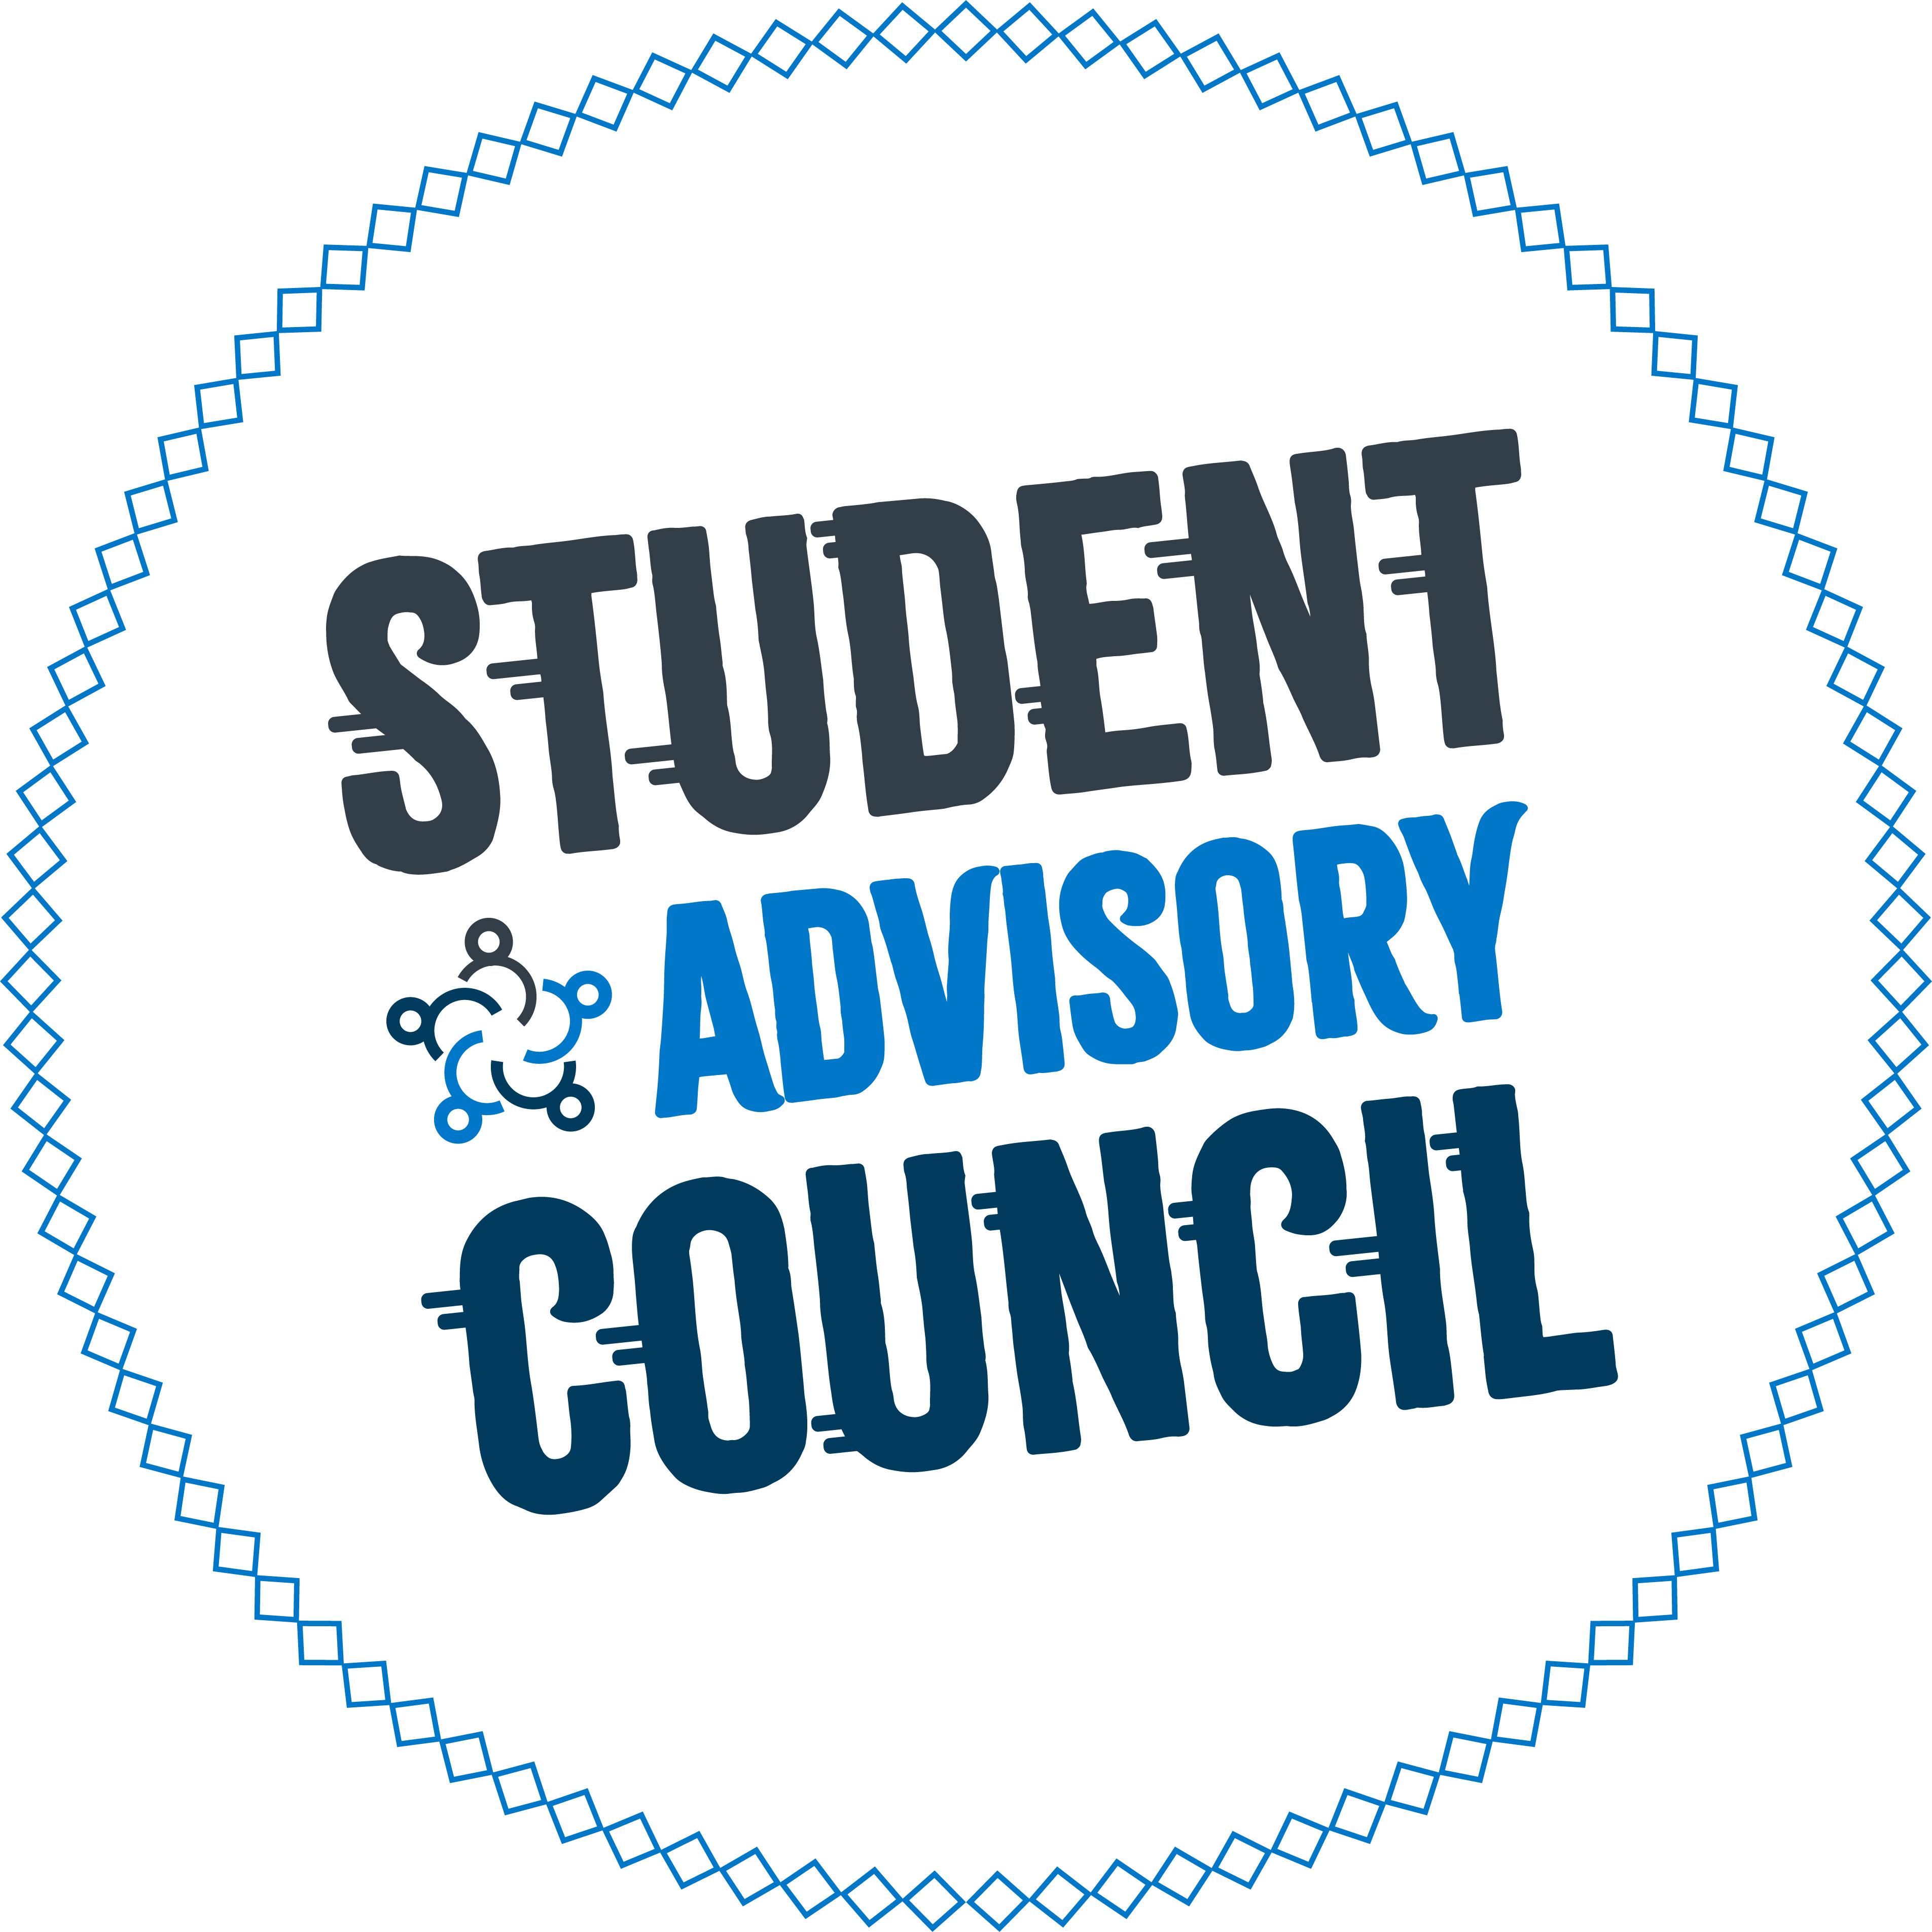 Illinois State Board of Education seeks applicants for Student Advisory Council